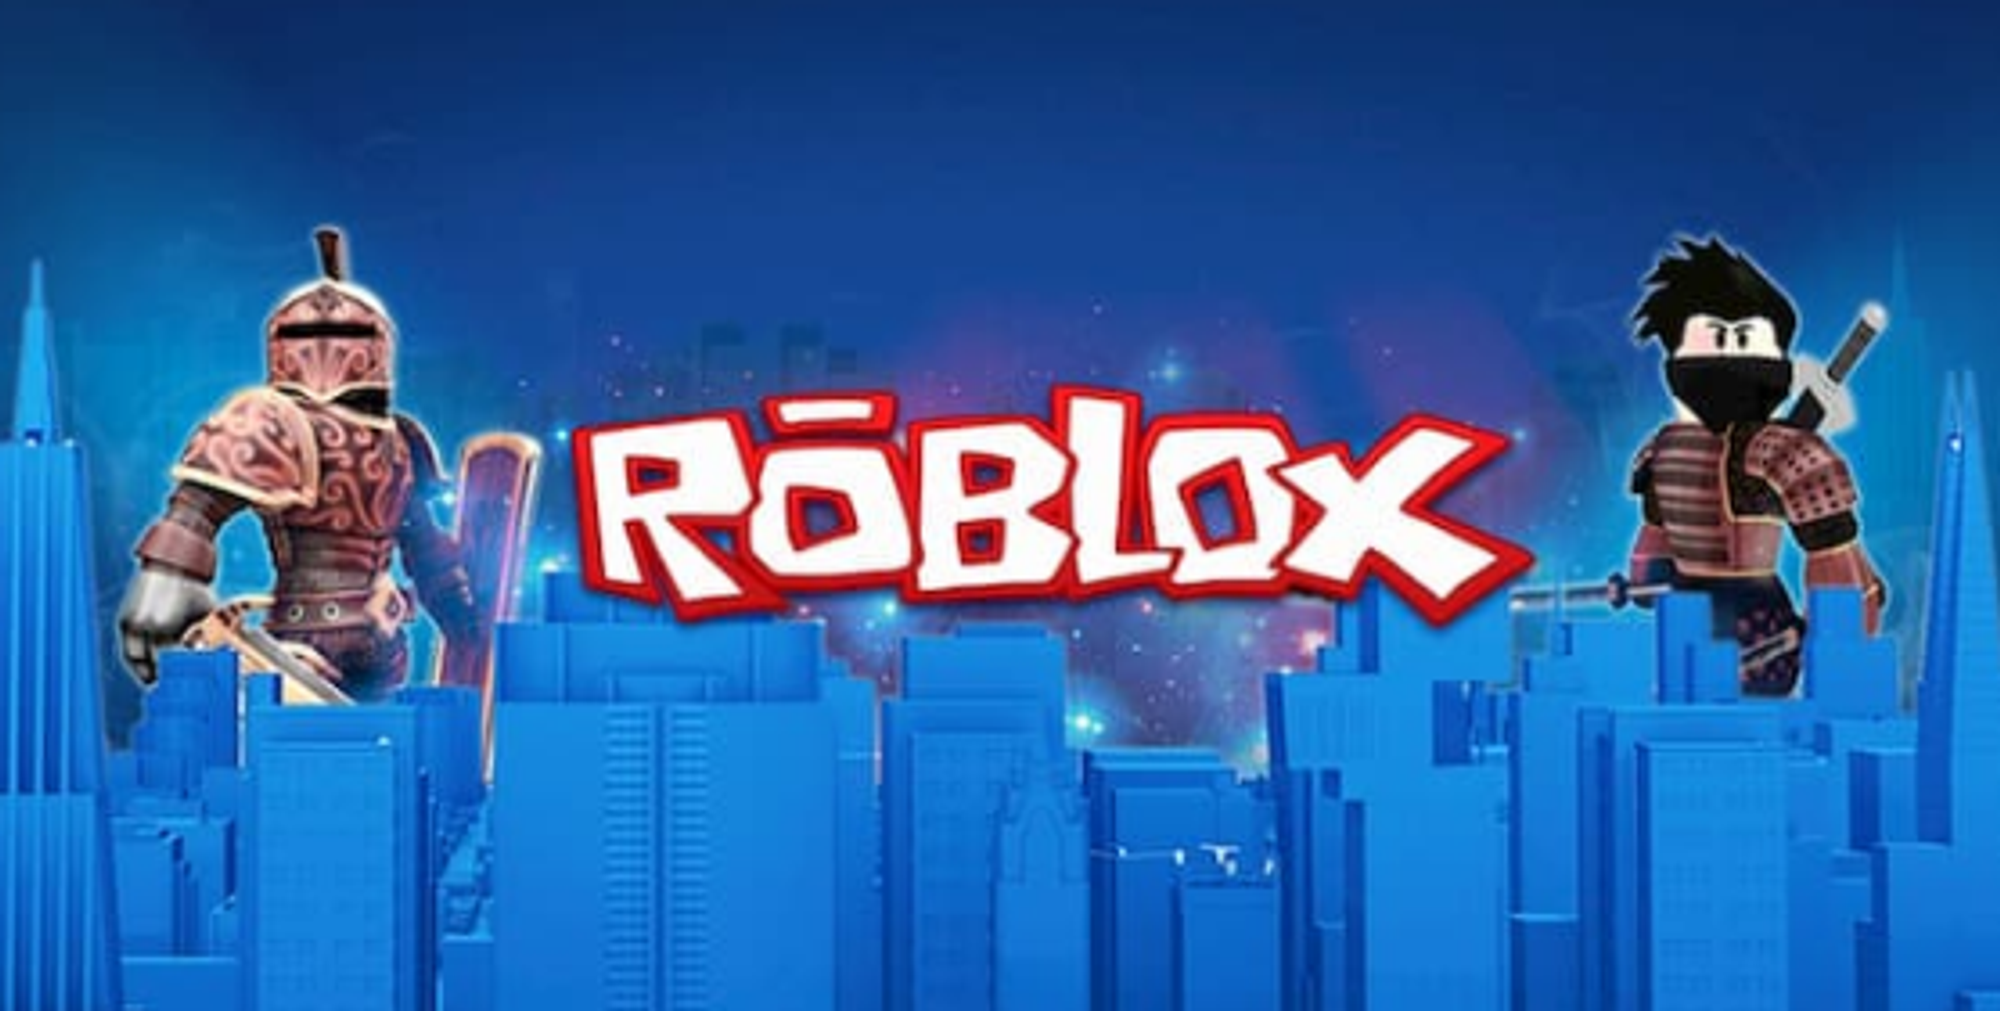 Roblox Robux Codes How To Get Free Robux In Roblox 2020 - hack blox piece android